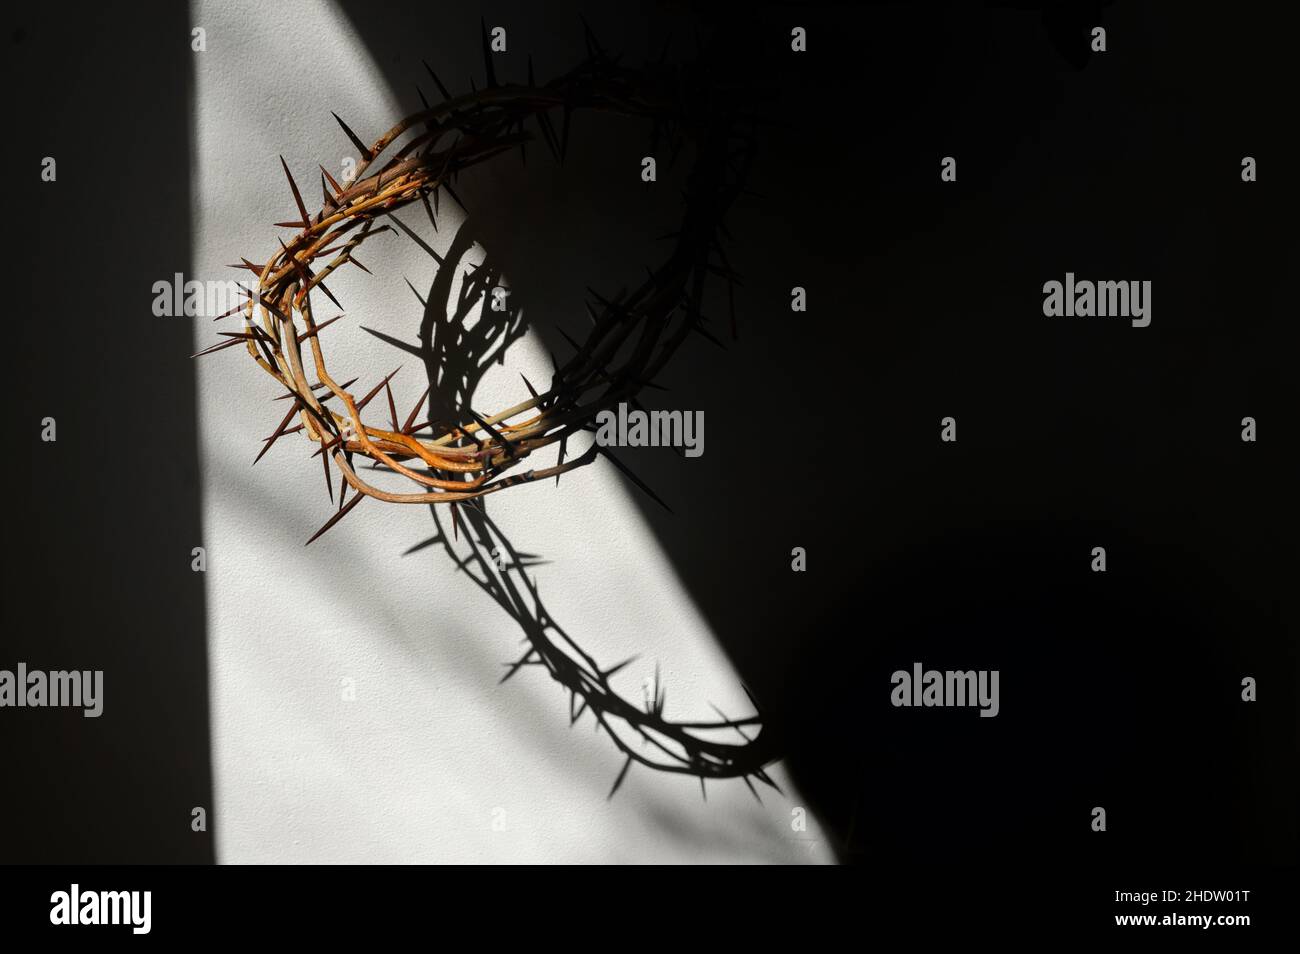 crown of thorns Stock Photo